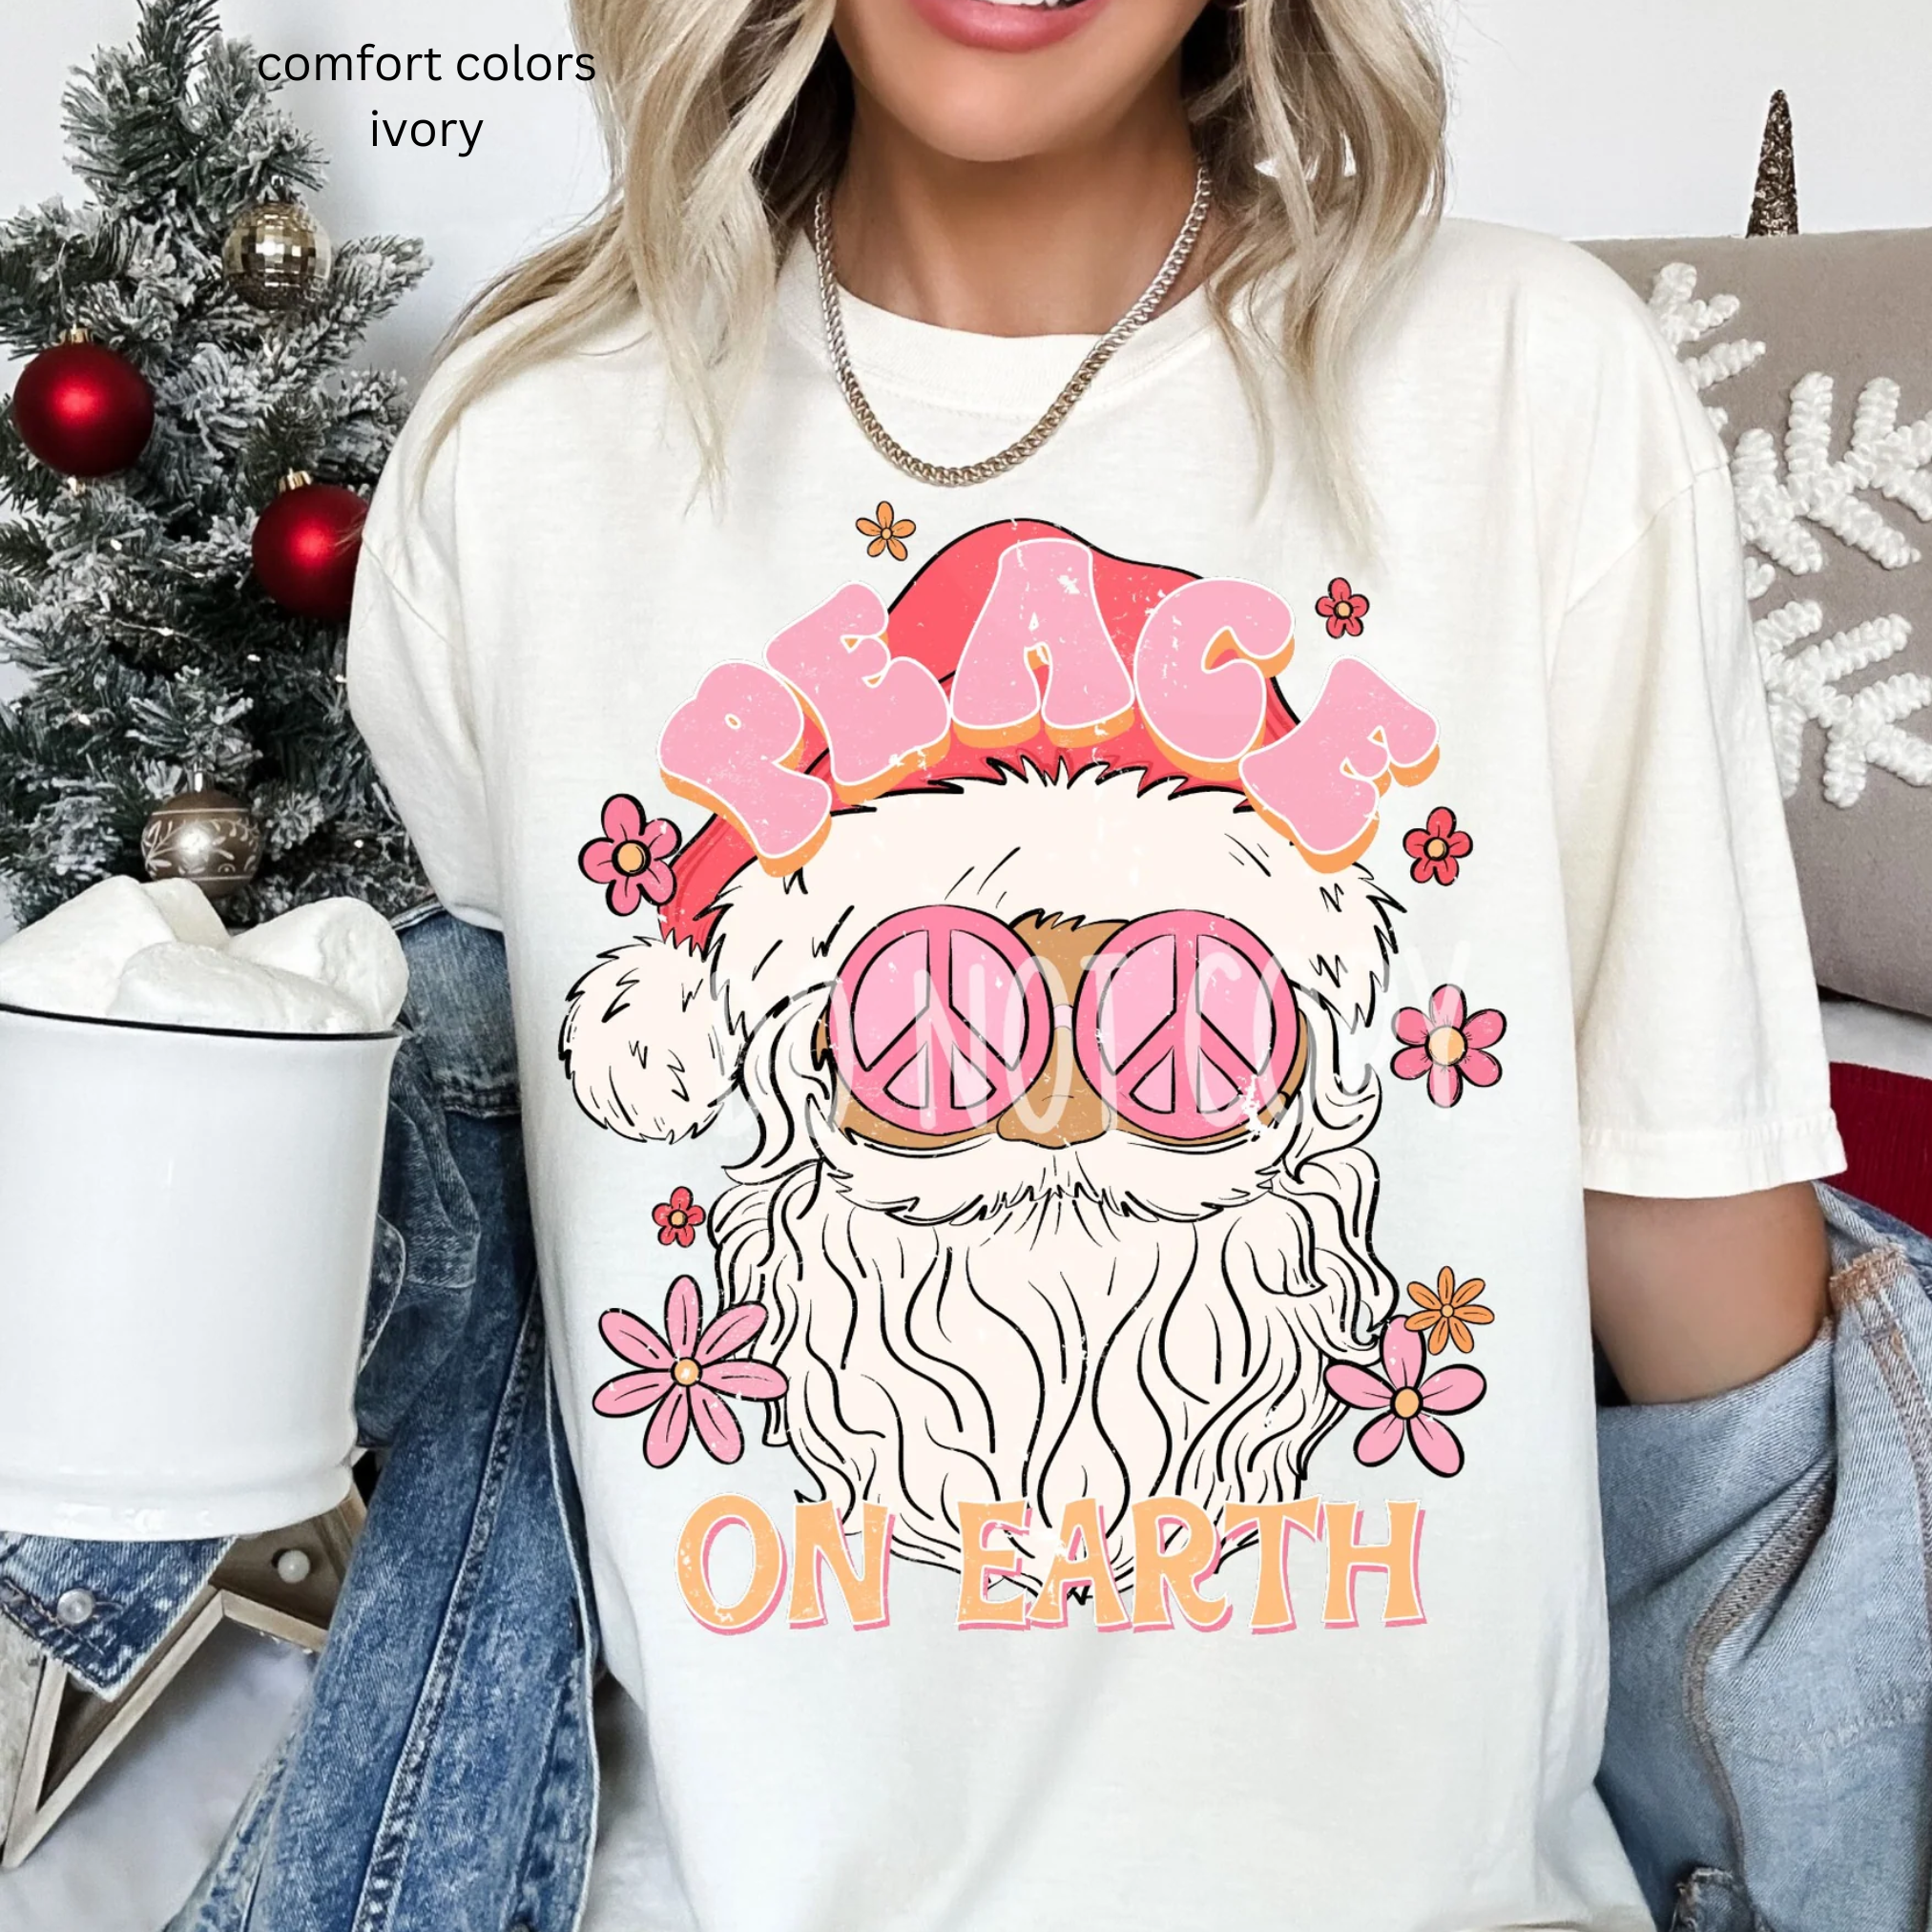 Peace on Earth Graphic Tee